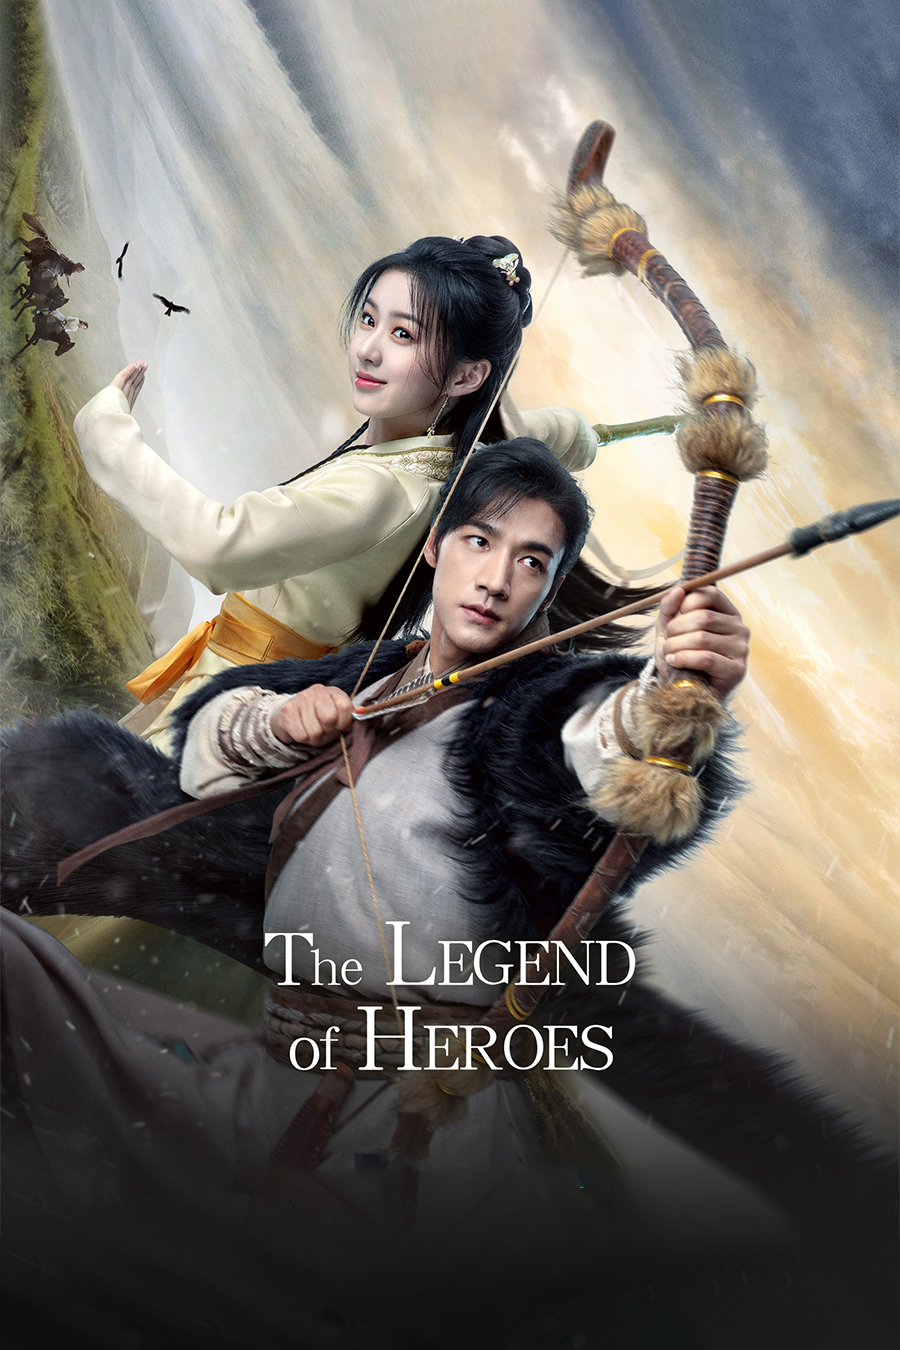 [23] The Legend of Heroes